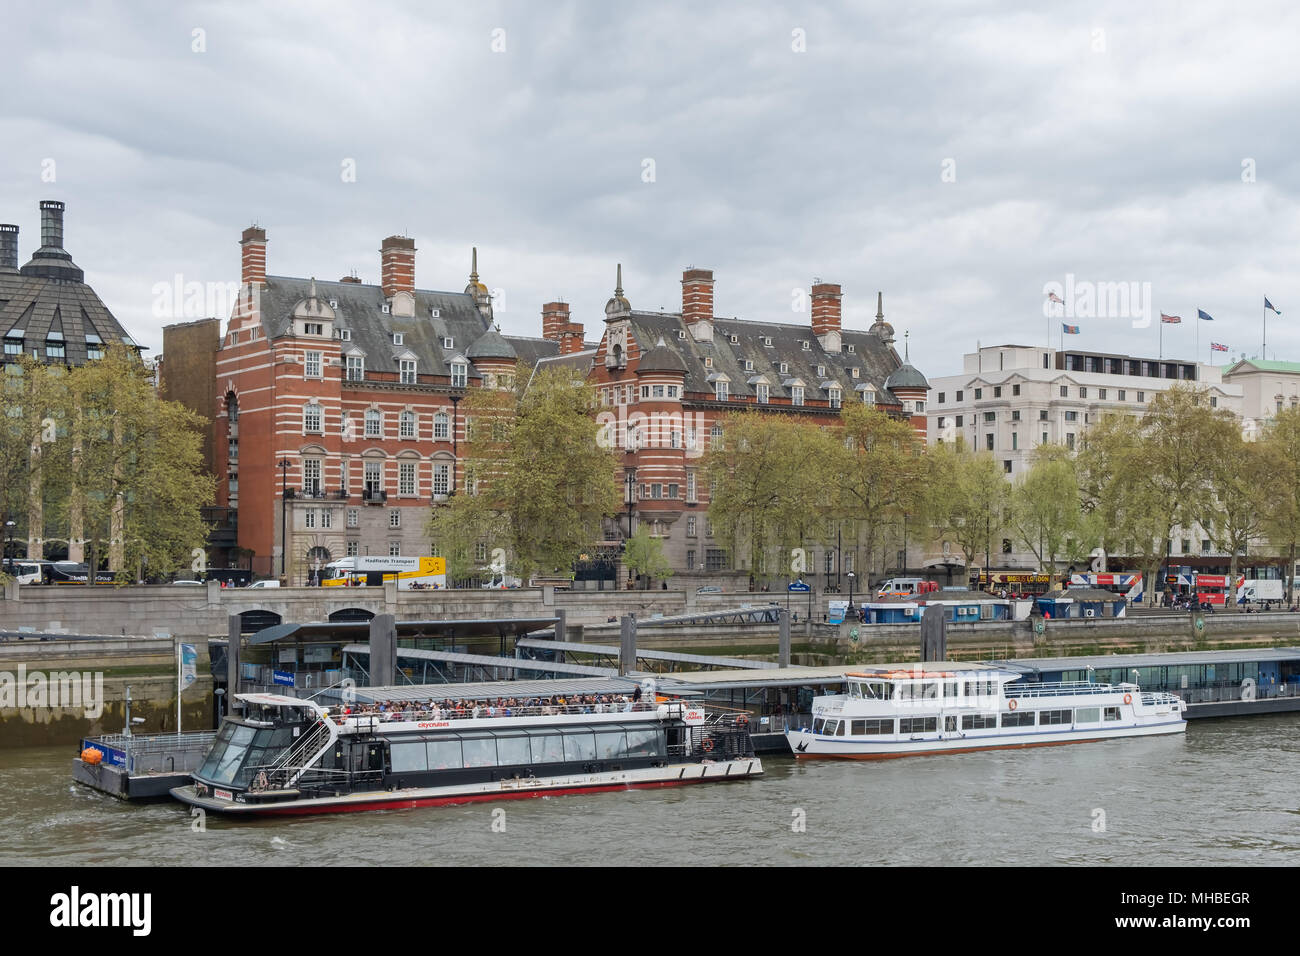 Sightseeing boats moored along the Thames River in London near the Westminster Bridge. Stock Photo